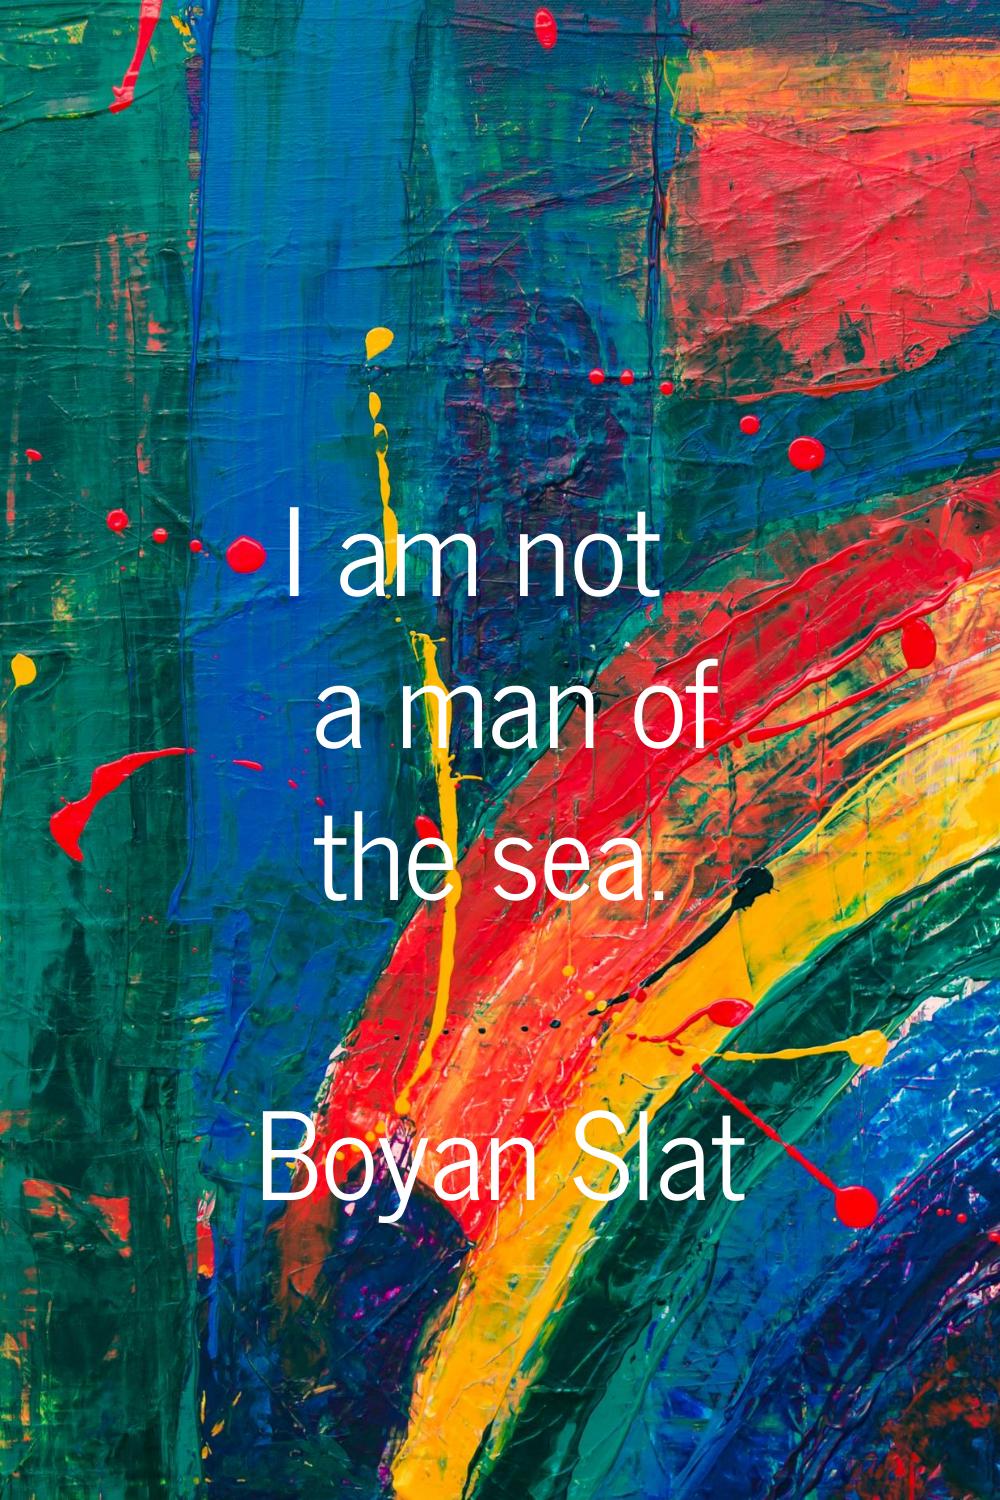 I am not a man of the sea.